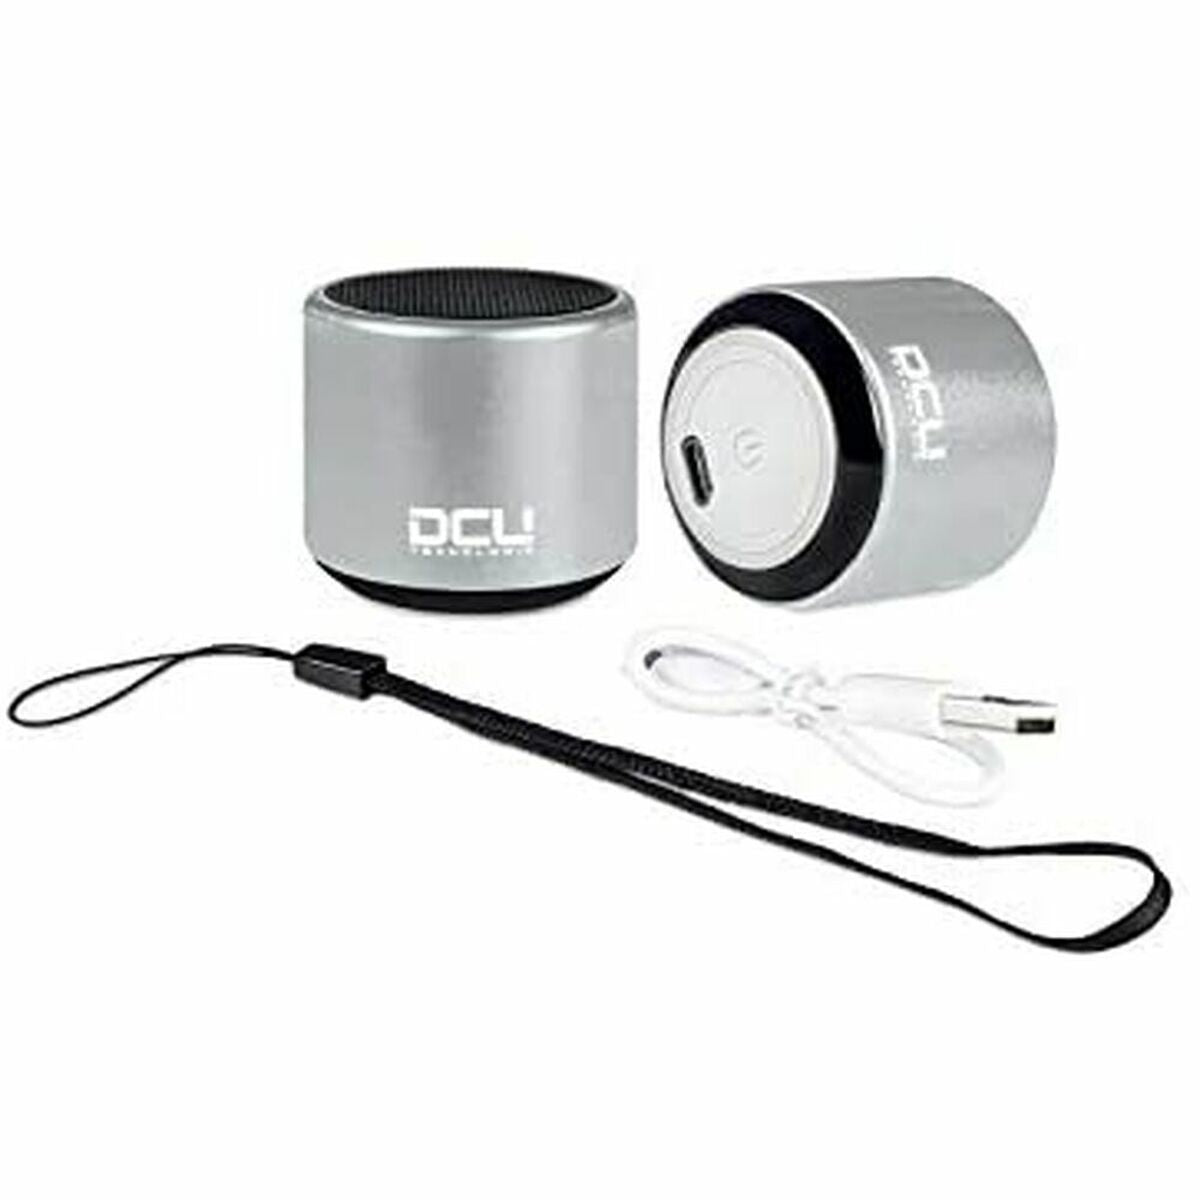 Portable Speaker DCU FATHER-3415600 3W, DCU Tecnologic, Electronics, Mobile communication and accessories, portable-speaker-dcu-father-3415600-3w, Brand_DCU Tecnologic, category-reference-2609, category-reference-2882, category-reference-2923, category-reference-t-19653, category-reference-t-21311, category-reference-t-4036, category-reference-t-4037, Condition_NEW, entertainment, music, Price_20 - 50, RiotNook